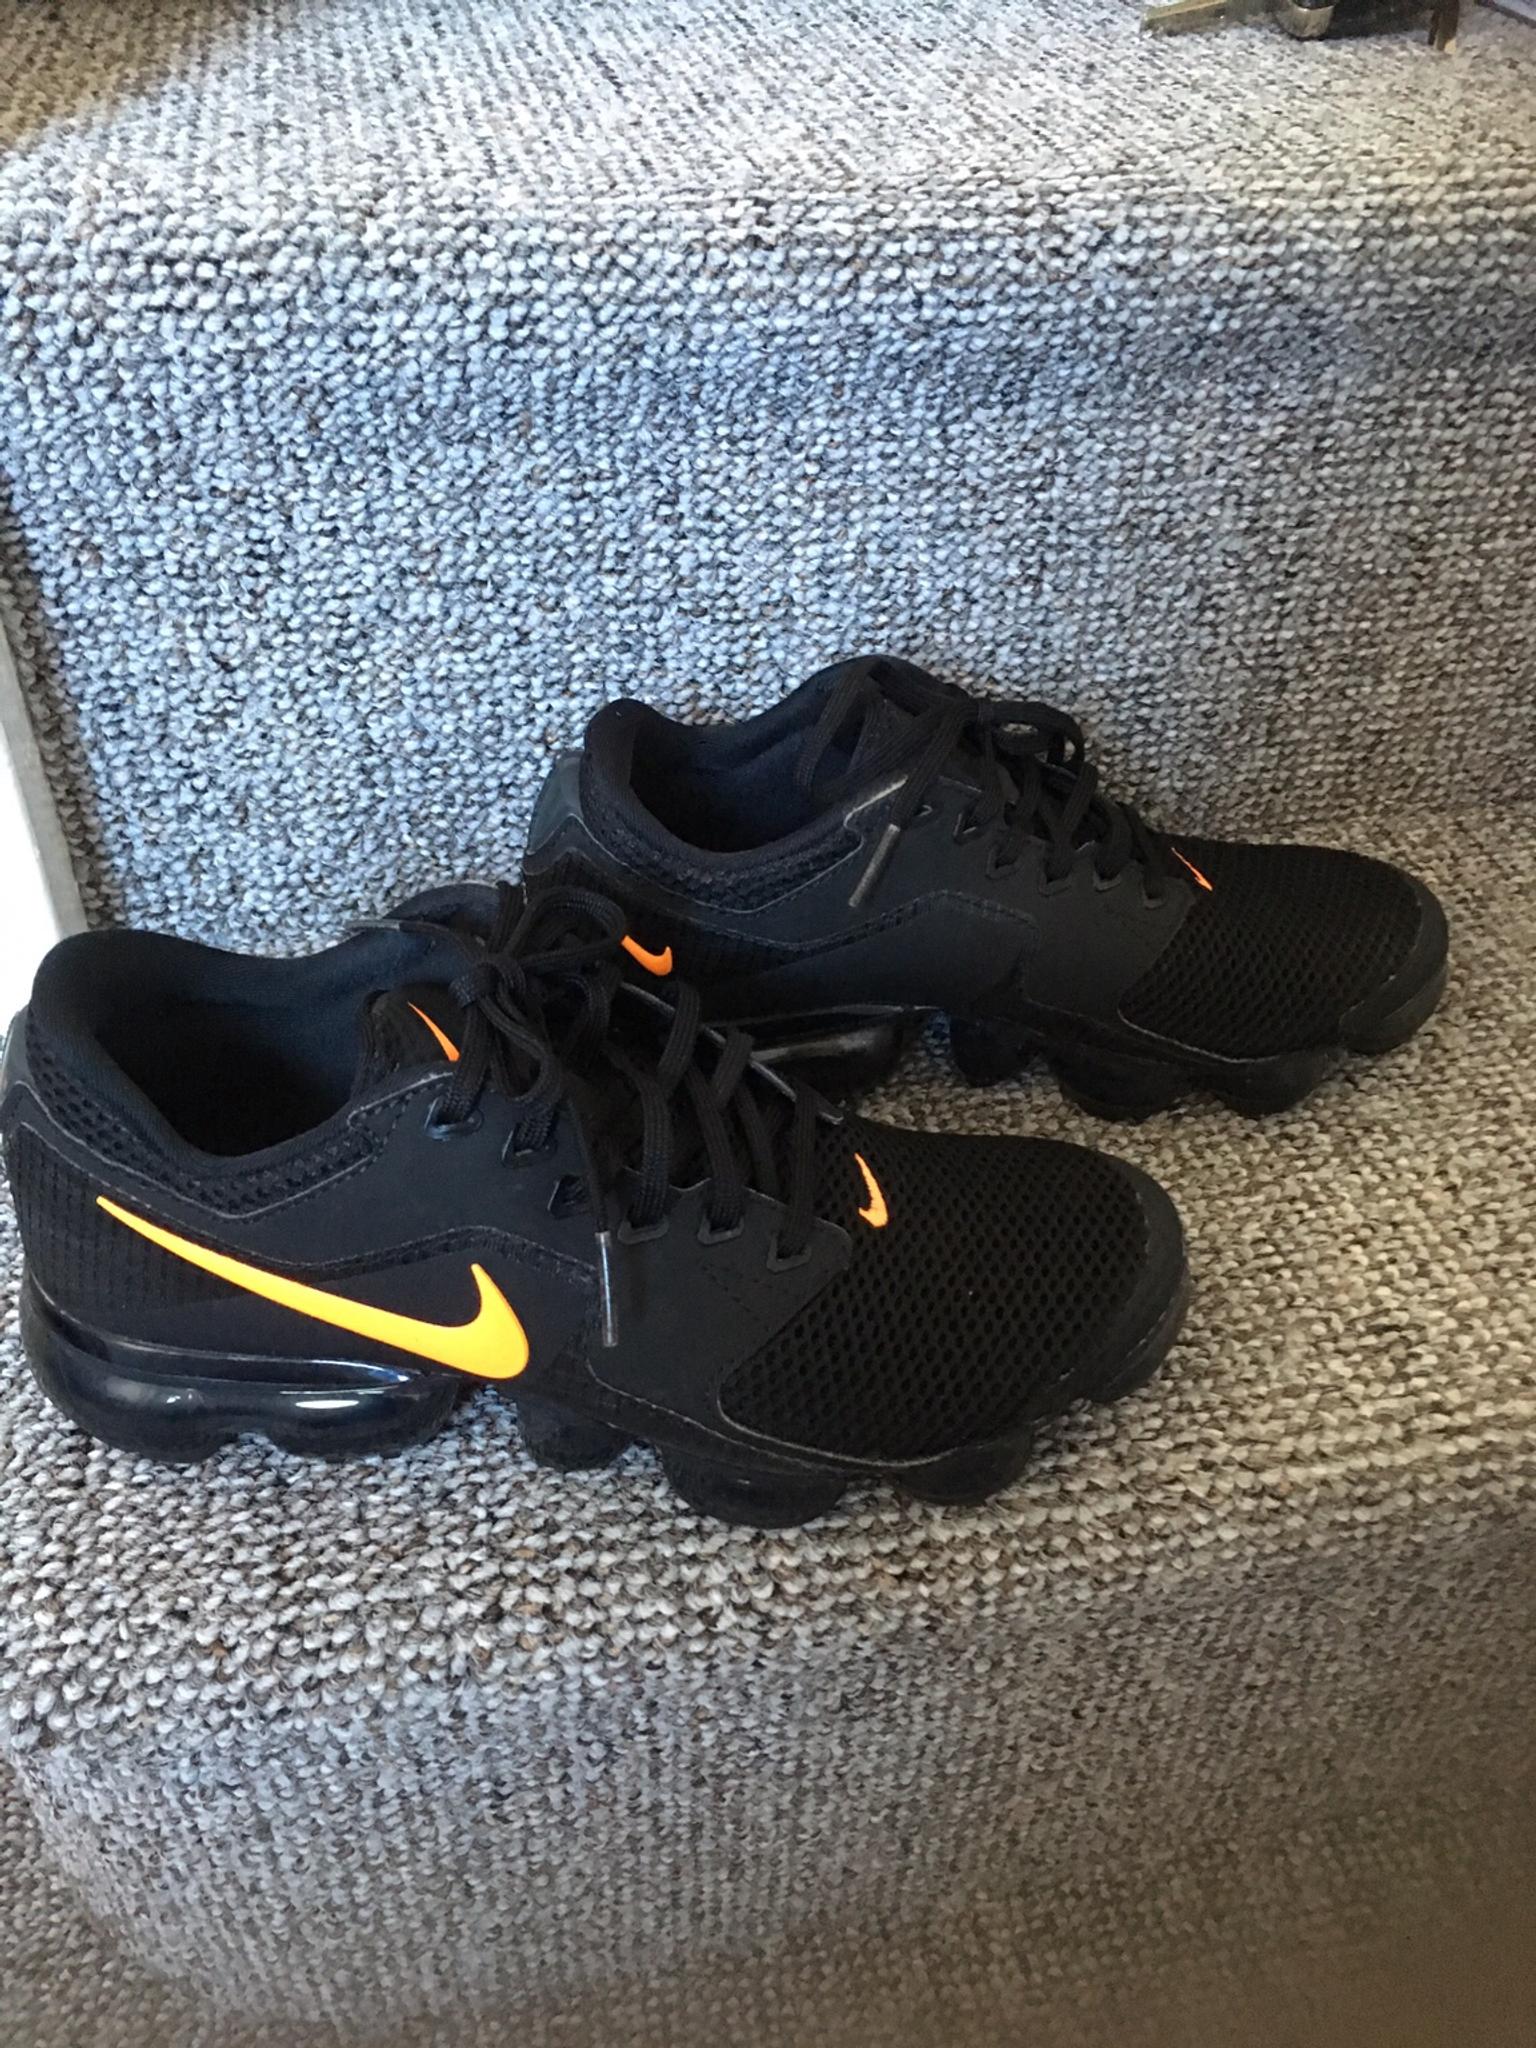 vapormax limited edition